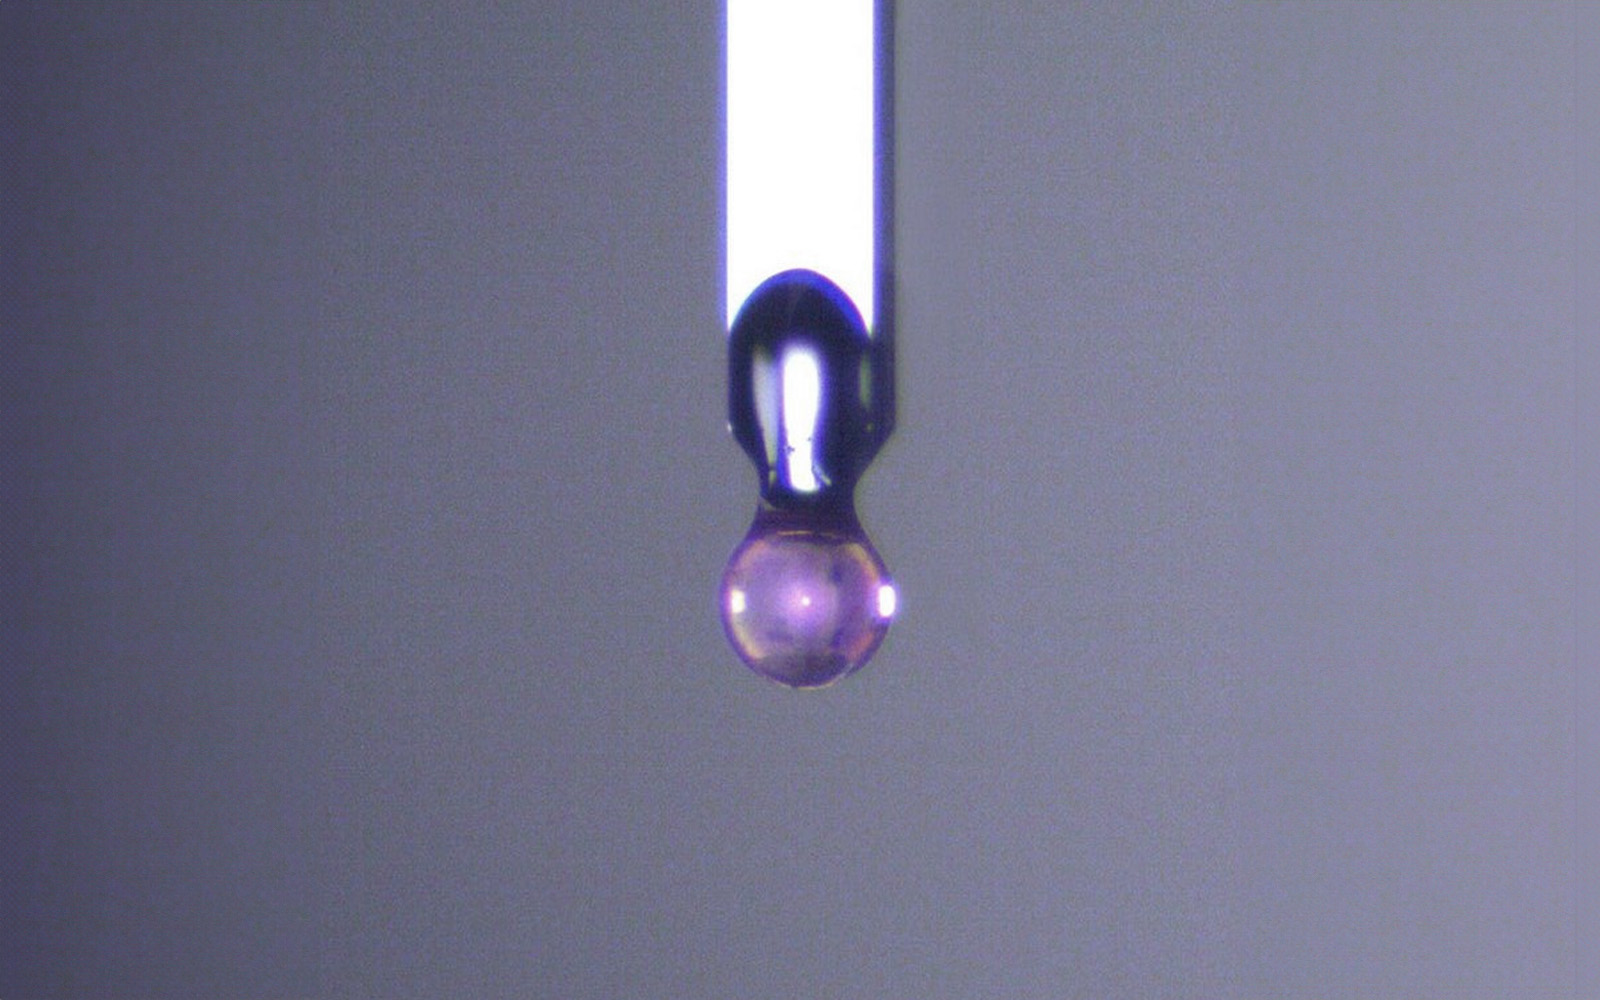 Close-up of a spherical ruby indenter tip used for soft material characterization.